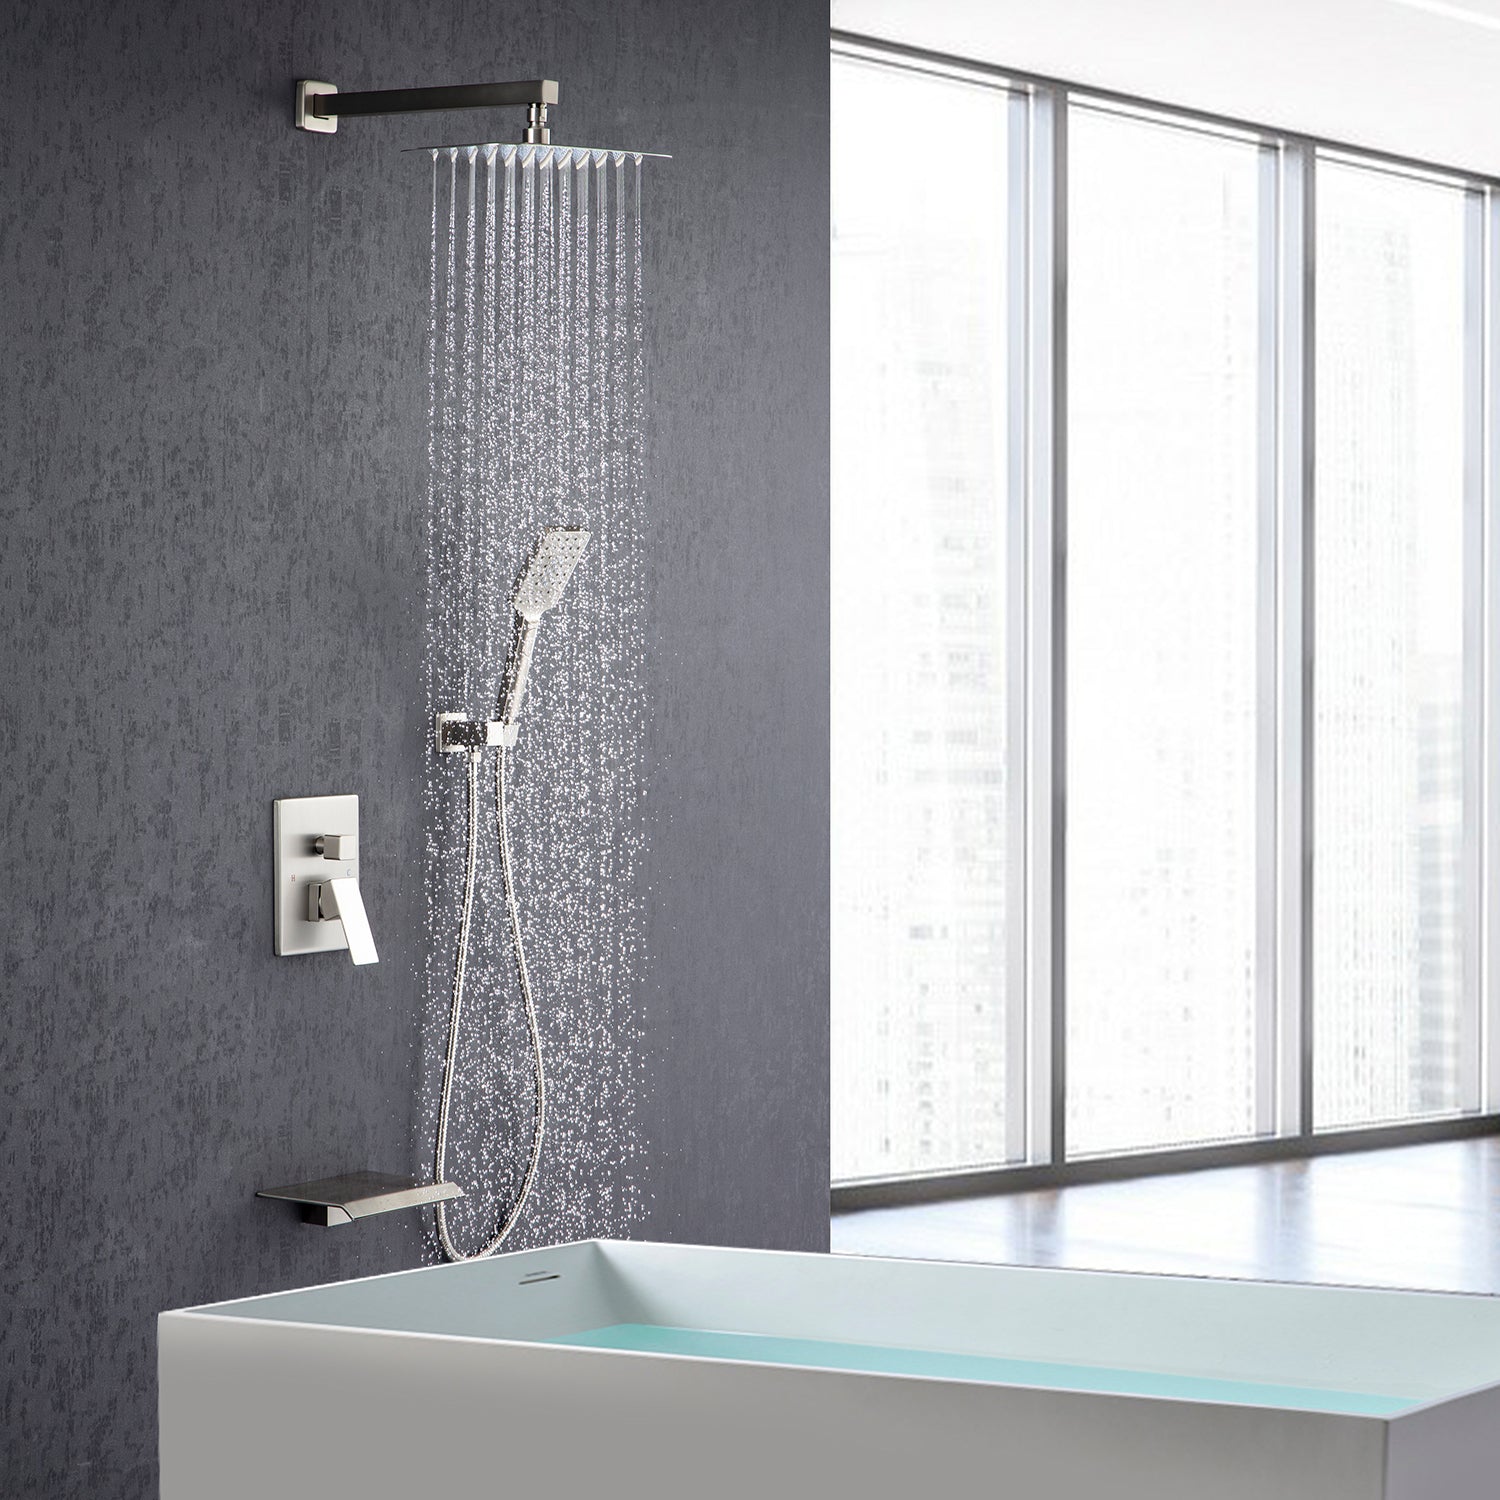 【Rainlex RX97203-12】12" Shower Head three Function Wall-Mount  Pressure Balance Square Shower Faucet(Rough-in Valve Included)